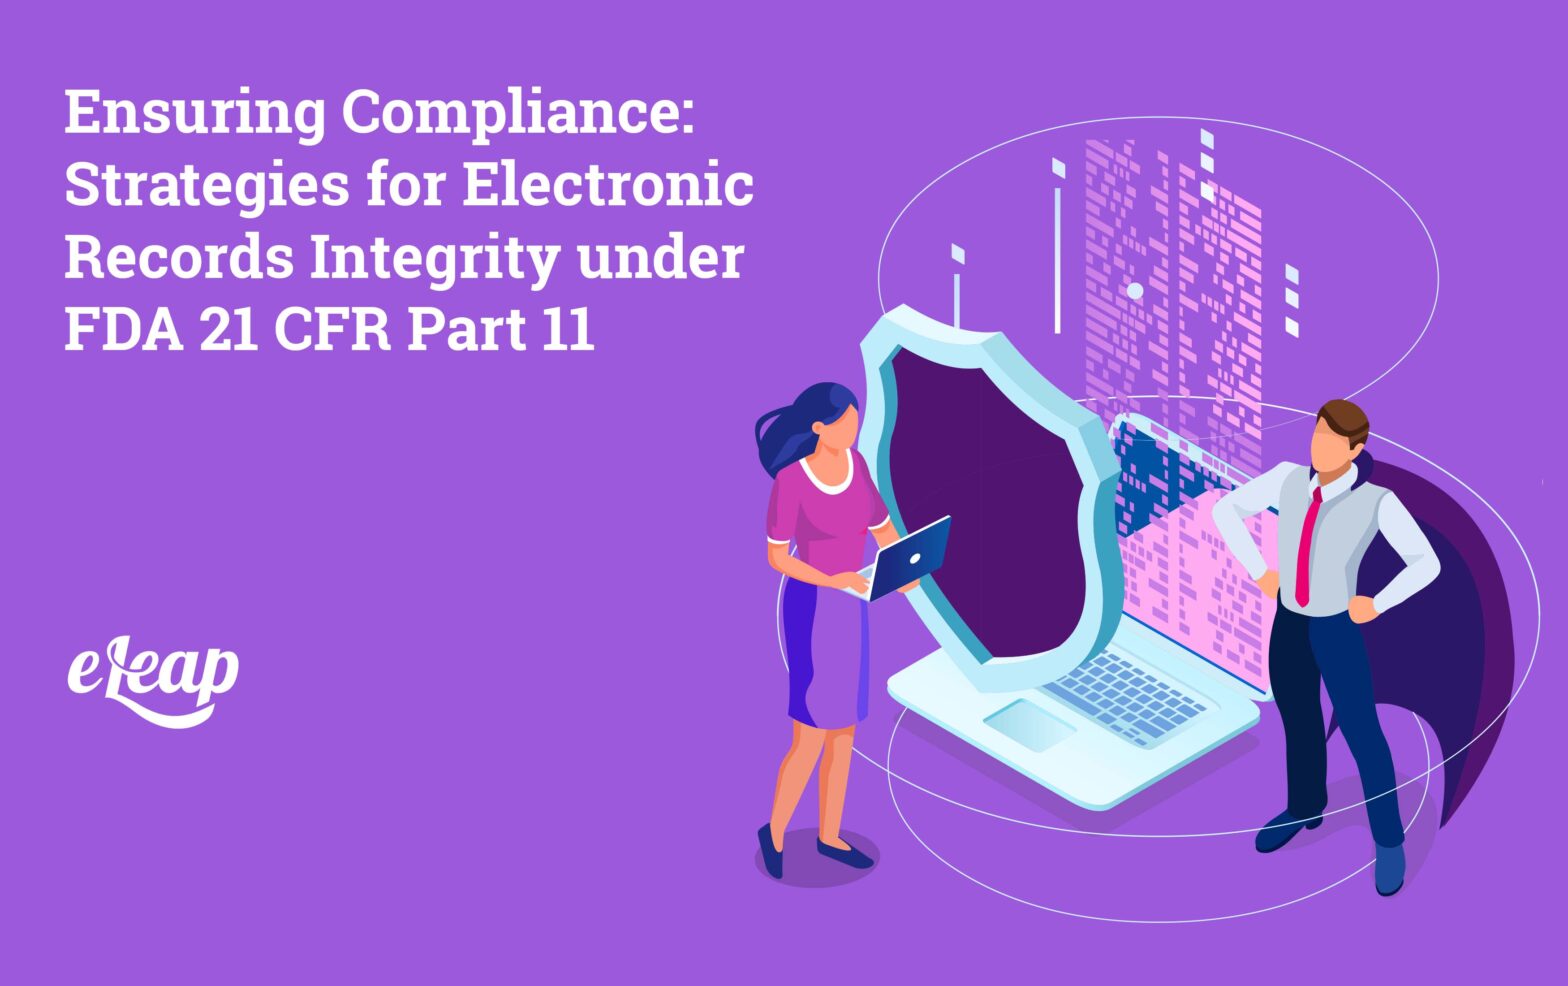 Ensuring Compliance: Strategies for Electronic Records Integrity under FDA 21 CFR Part 11